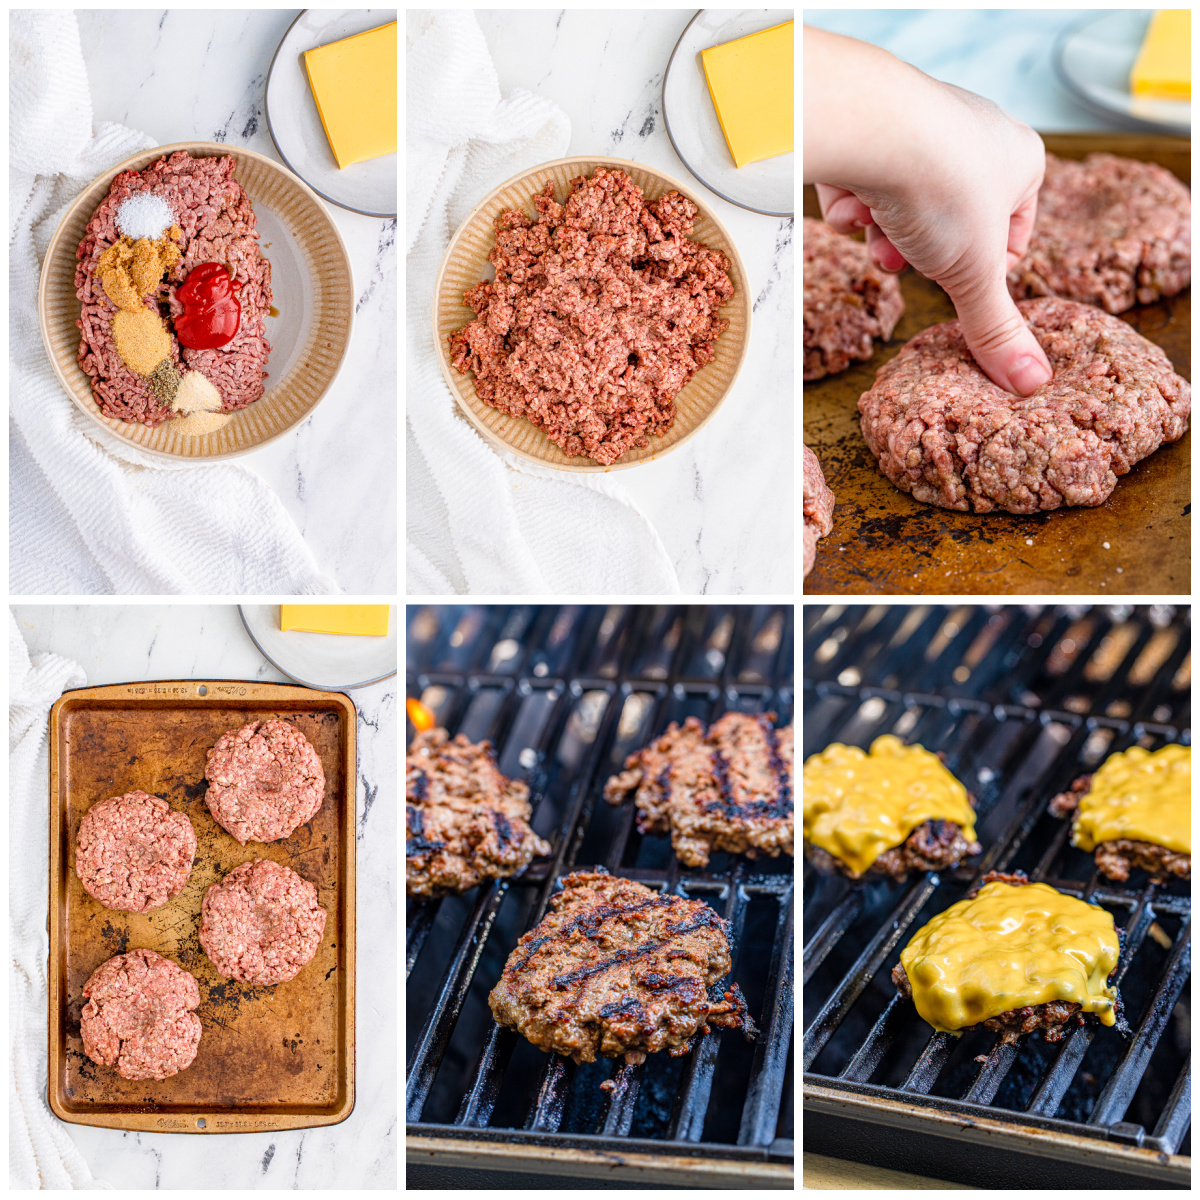 Step by step photos on how to make a Cheeseburger Recipe